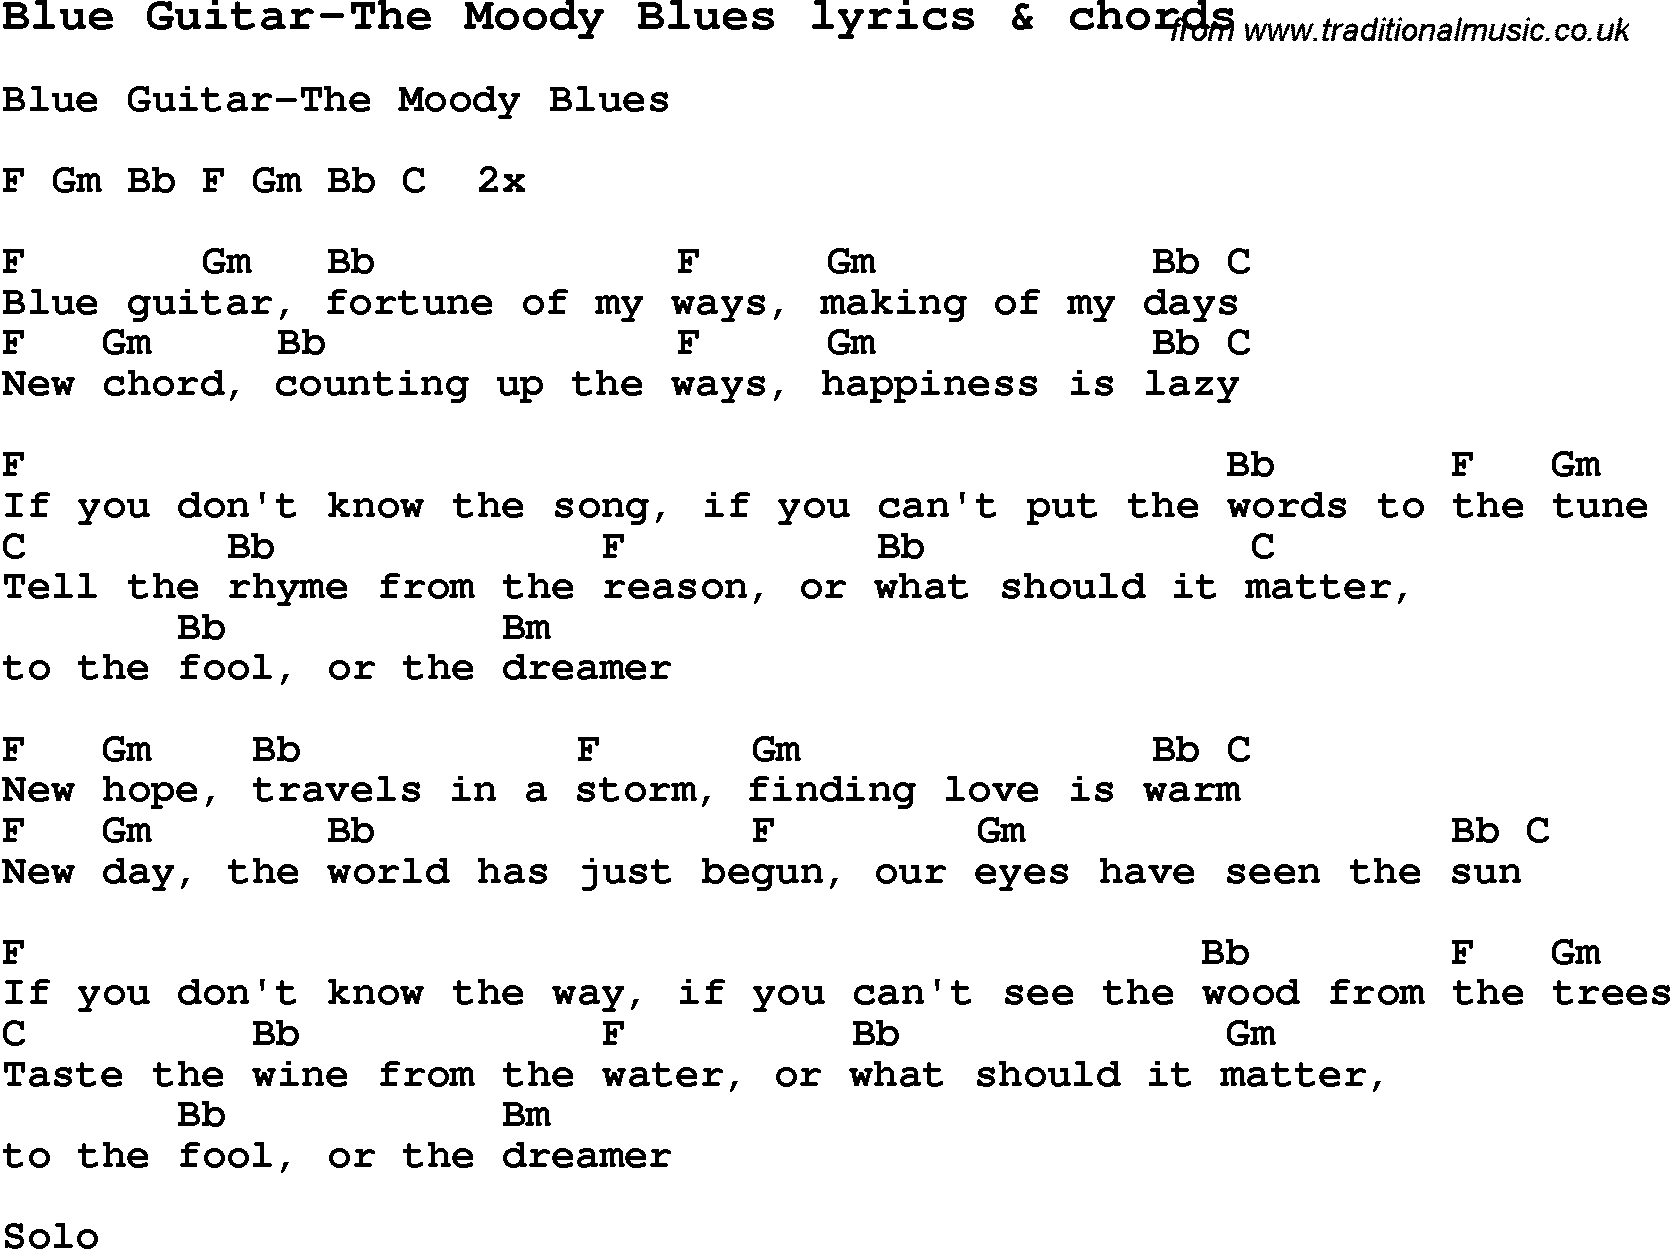 Love Song Lyrics for: Blue Guitar-The Moody Blues with chords for Ukulele, Guitar Banjo etc.